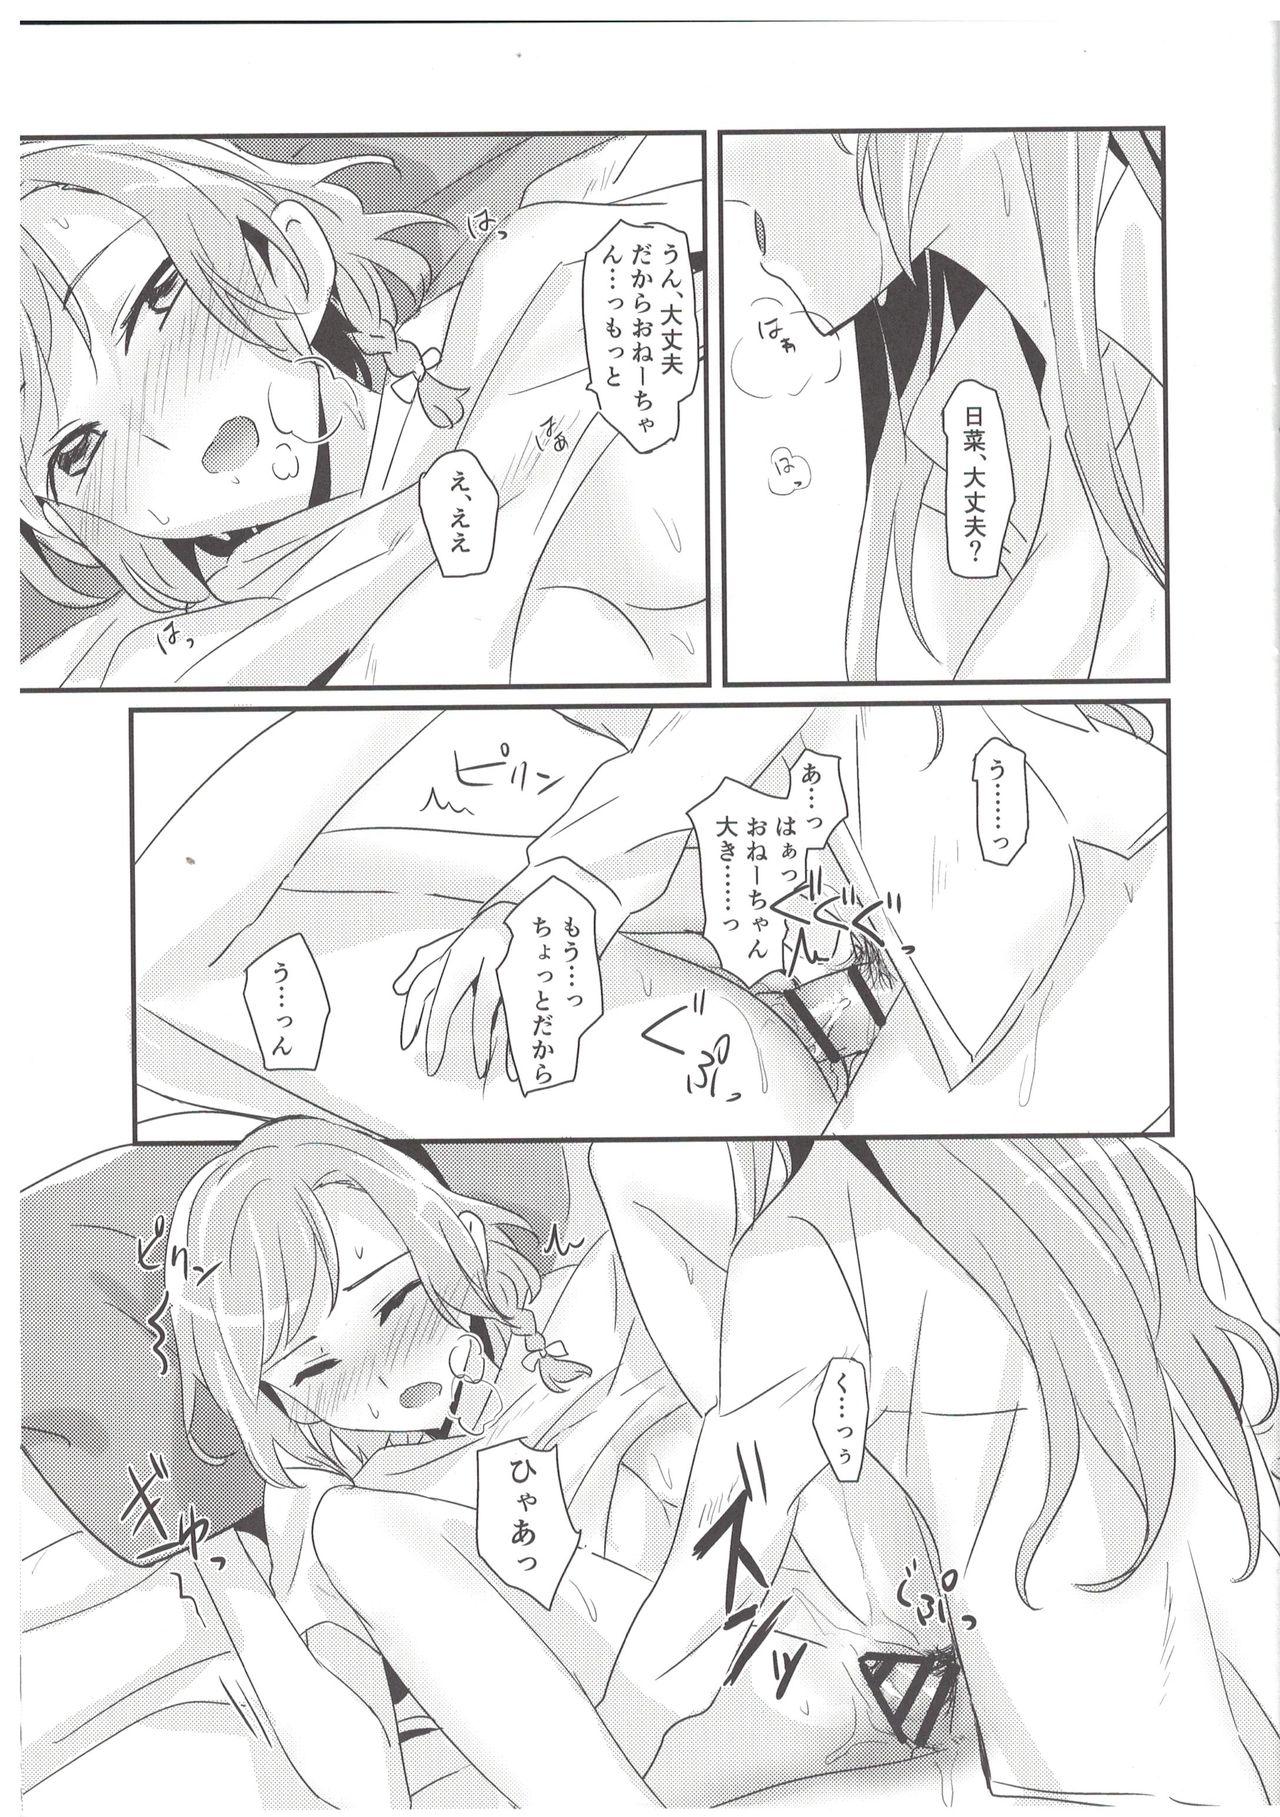 Ass To Mouth AM:0 - Bang dream Aunt - Page 4